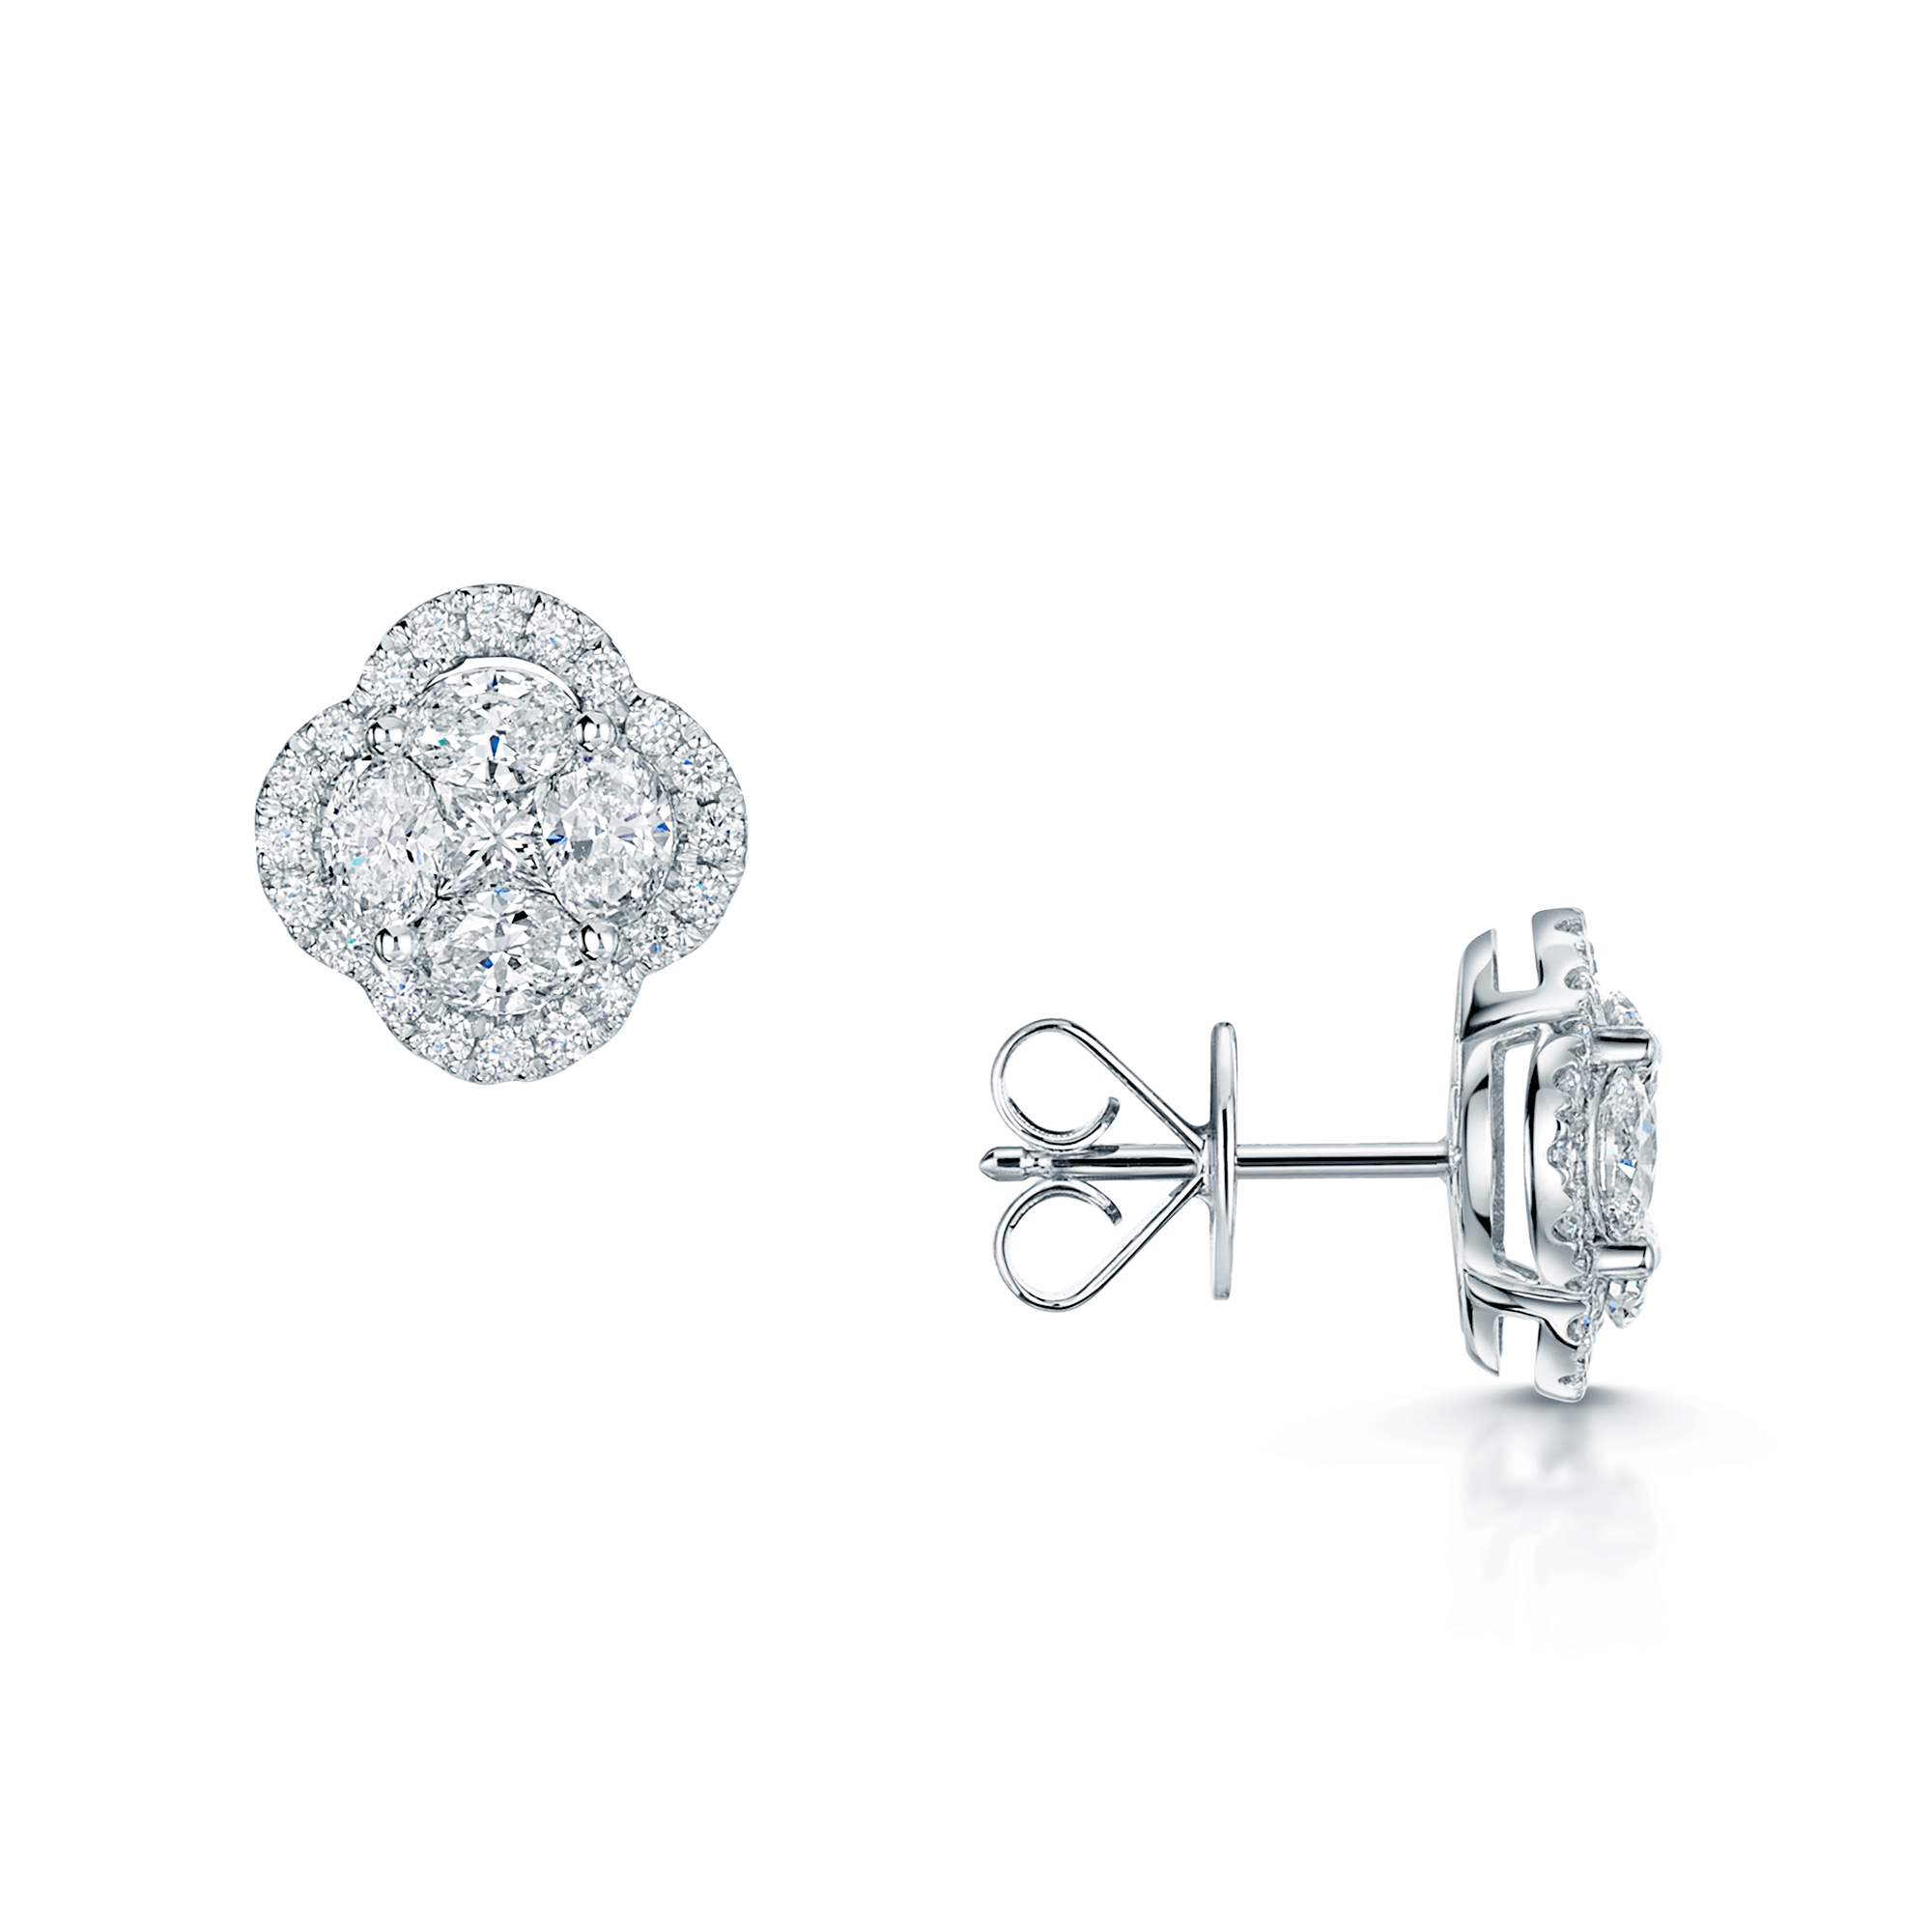 18ct White Gold Oval, Marquise And Brilliant Cut Diamond Cluster Stud Earrings